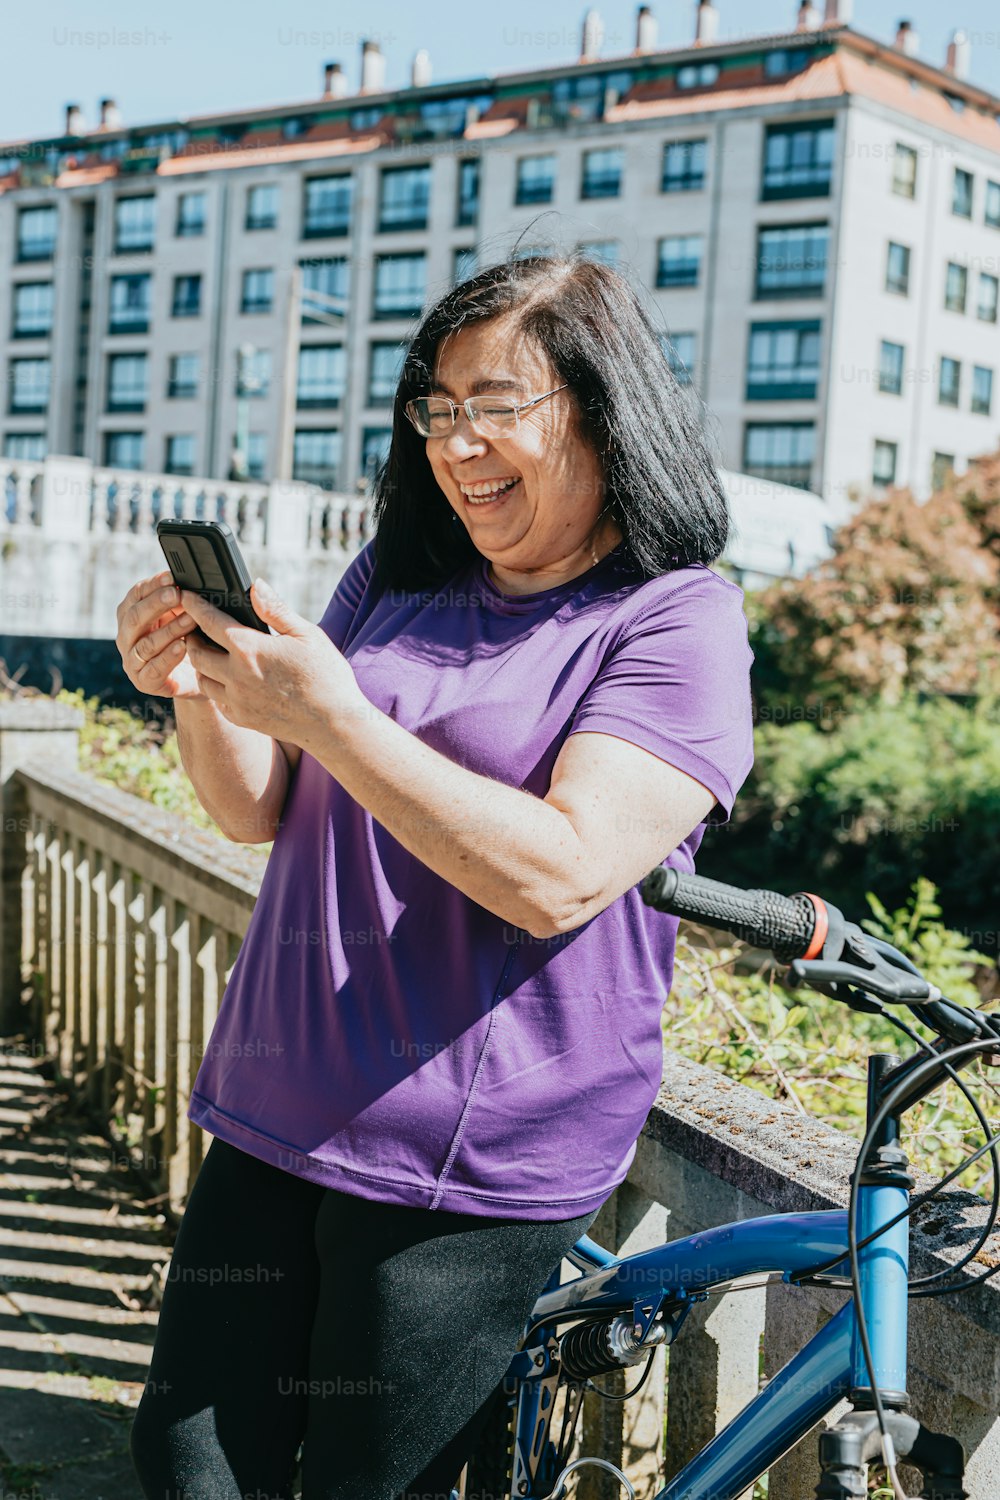 a woman standing next to a bike holding a cell phone